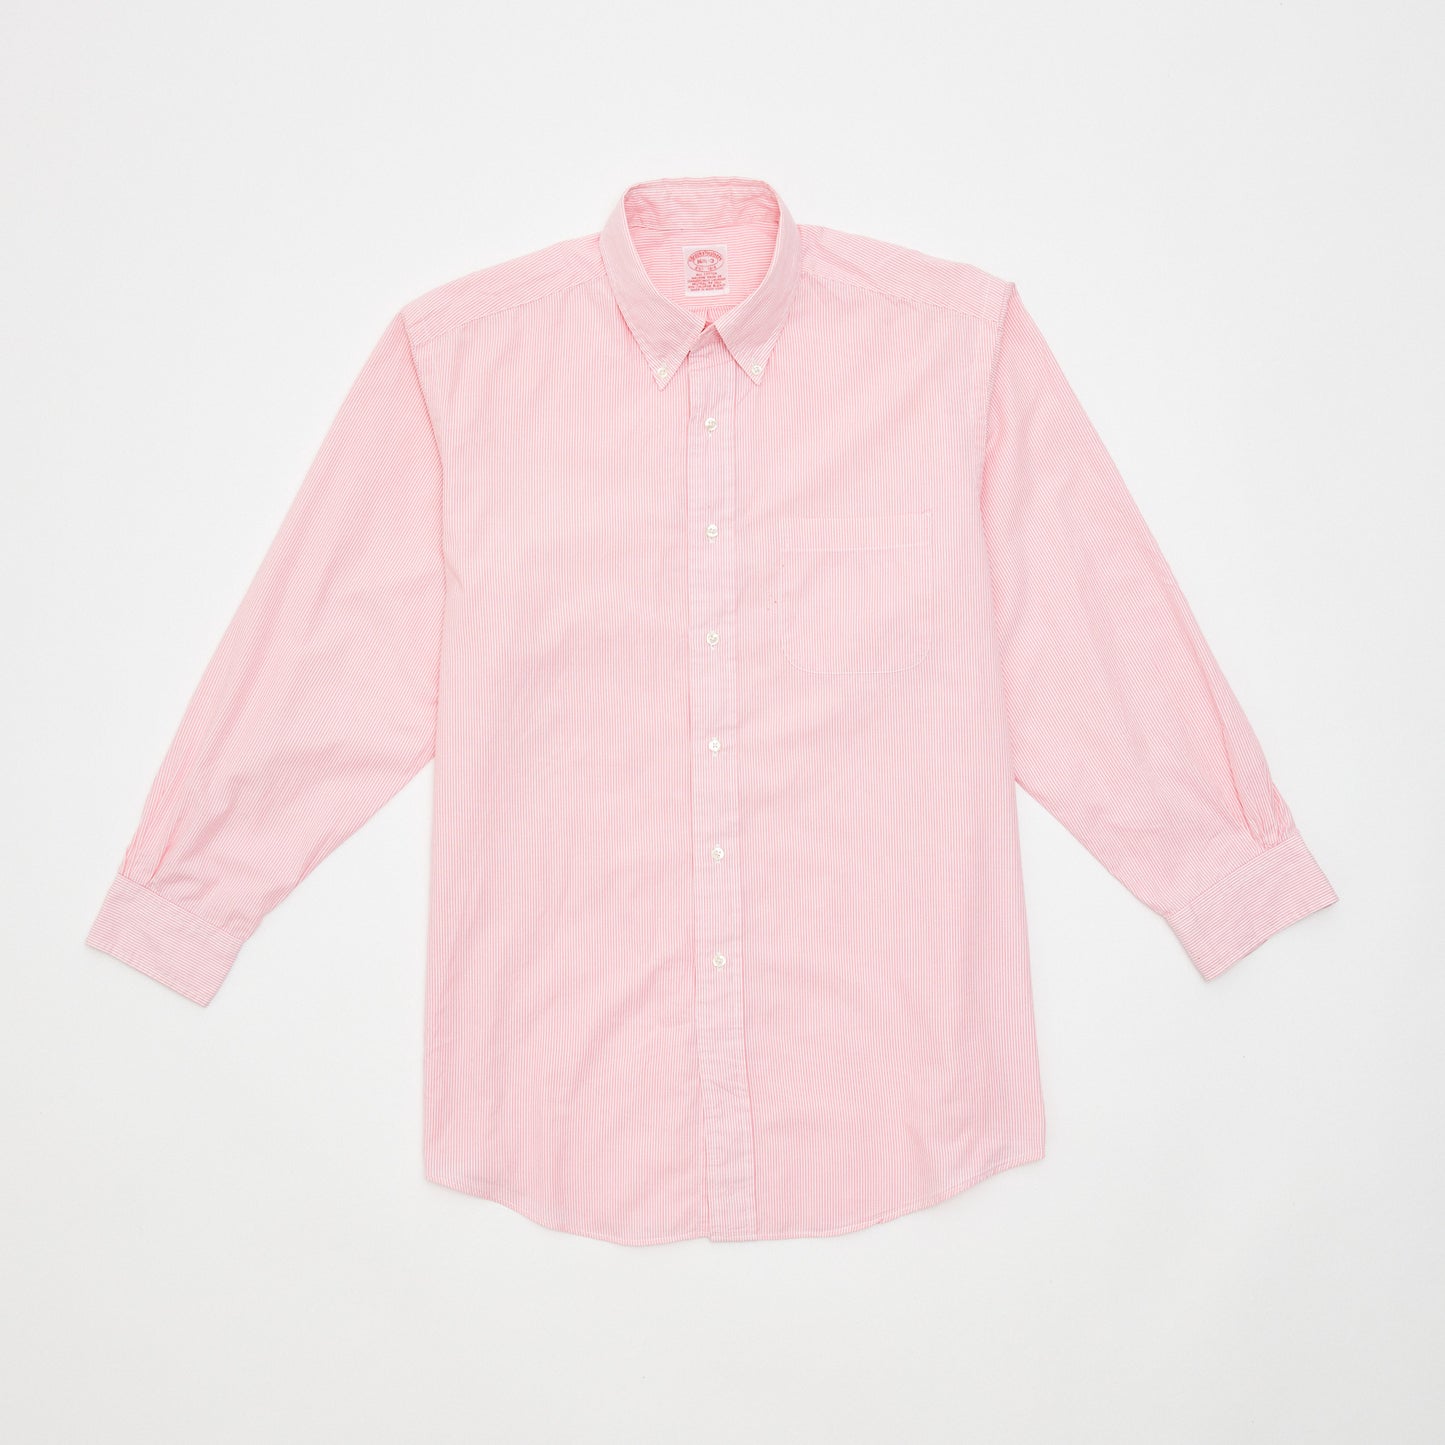 Brooks Brothers pink button down